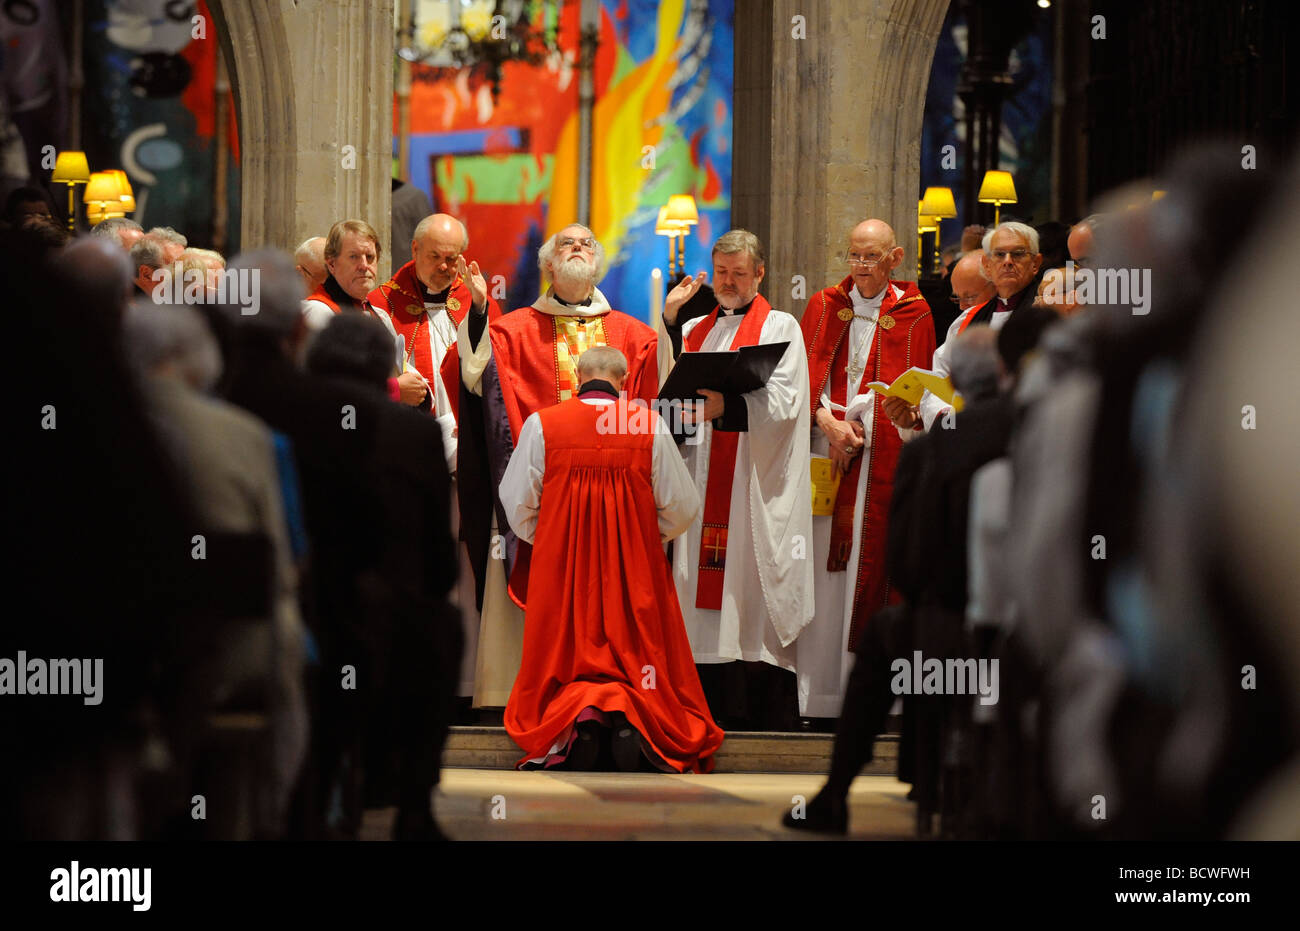 The consecration of Bishop Mark Sowerby, the new Bishop of Horsham, by the archbishop Rowan Williams in Chichester Cathedral. Stock Photo